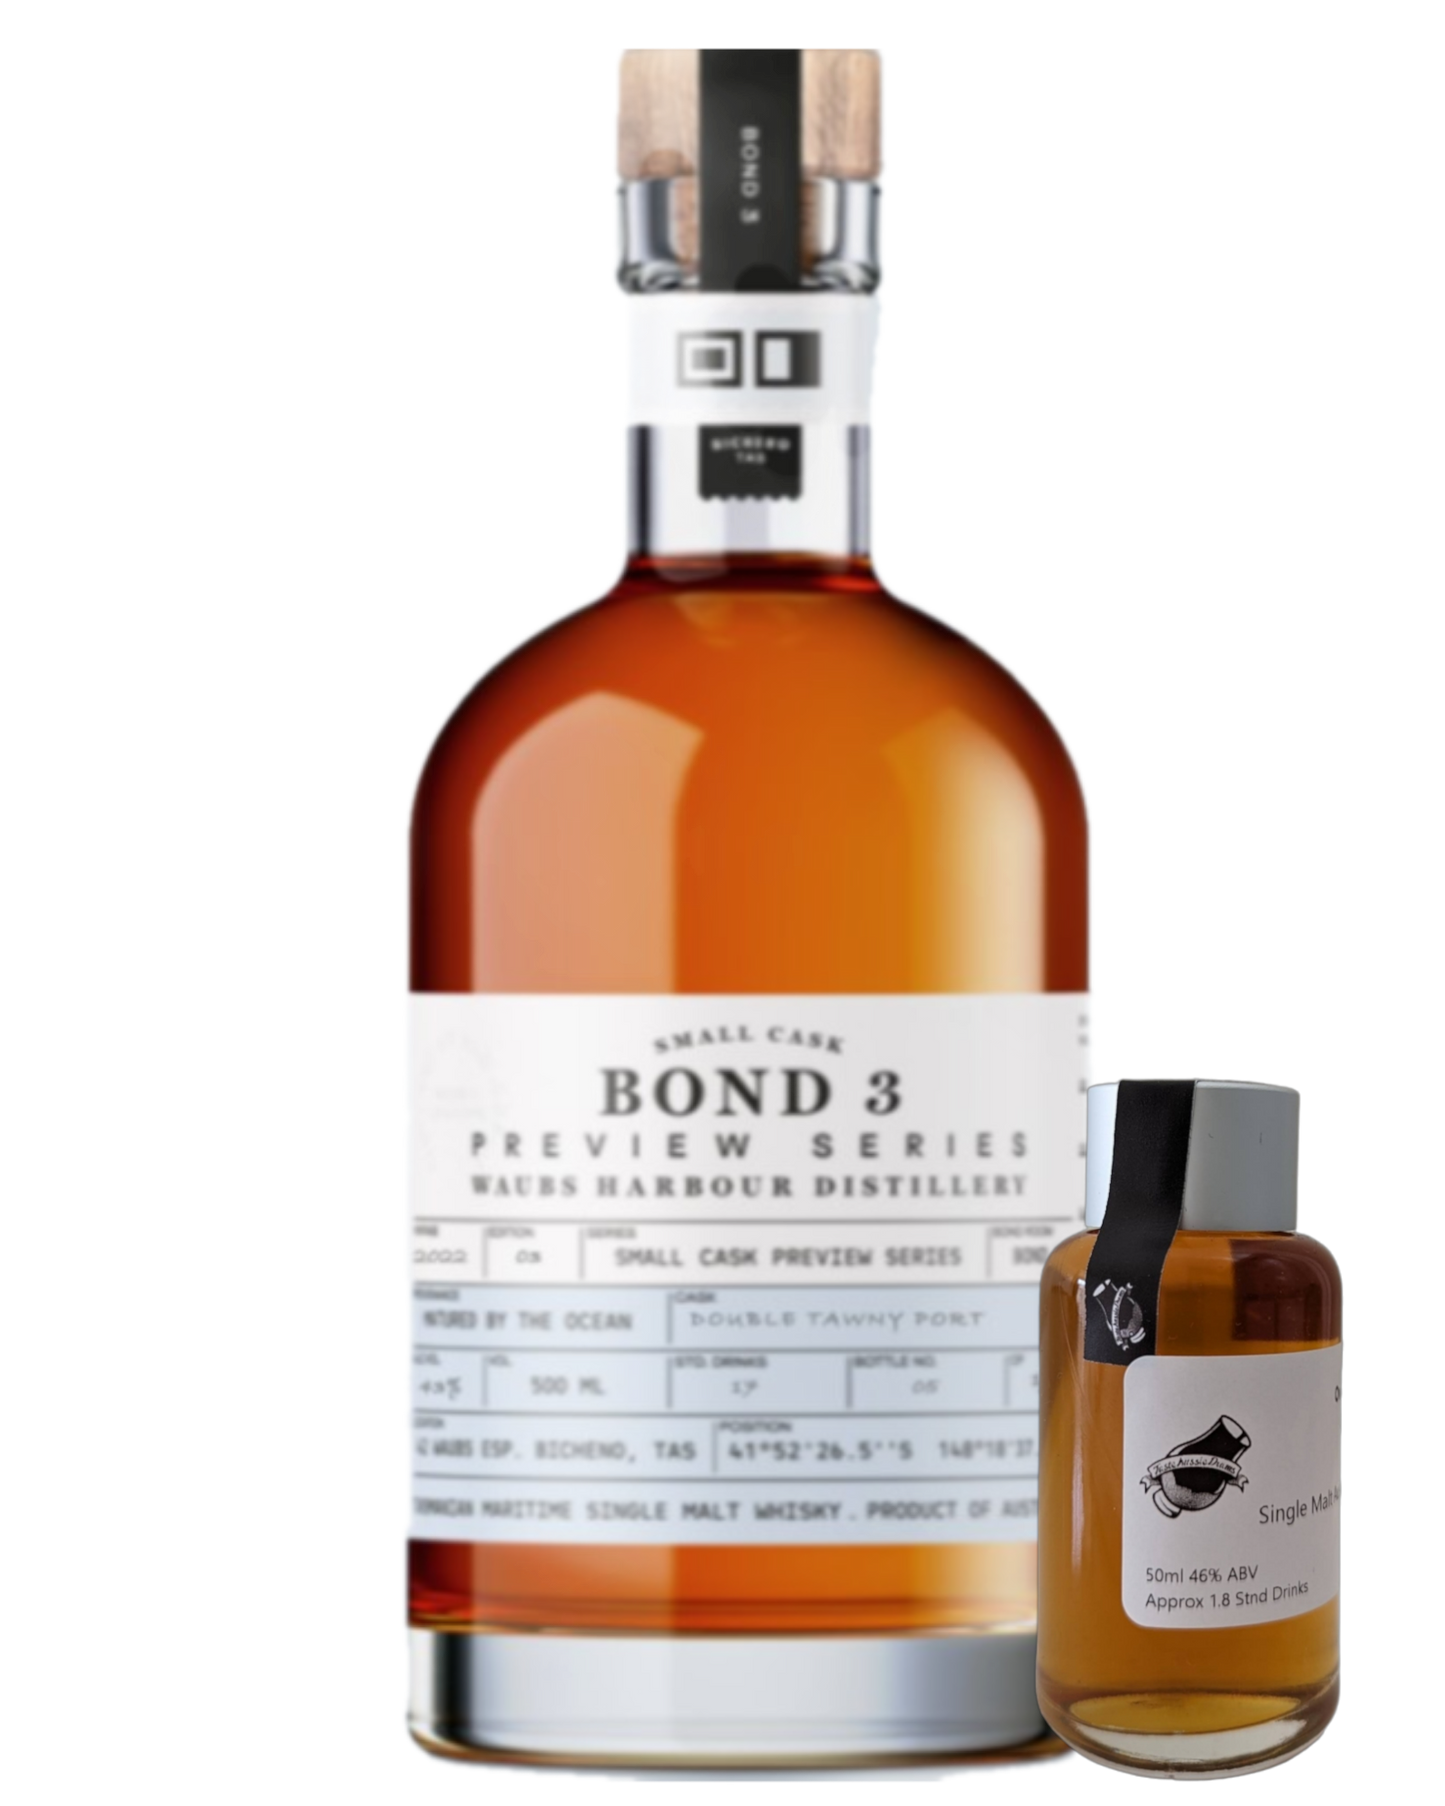 Waubs Harbour Distillery 'Preview Series #4 Apera Cask Strength' Various Size Samples